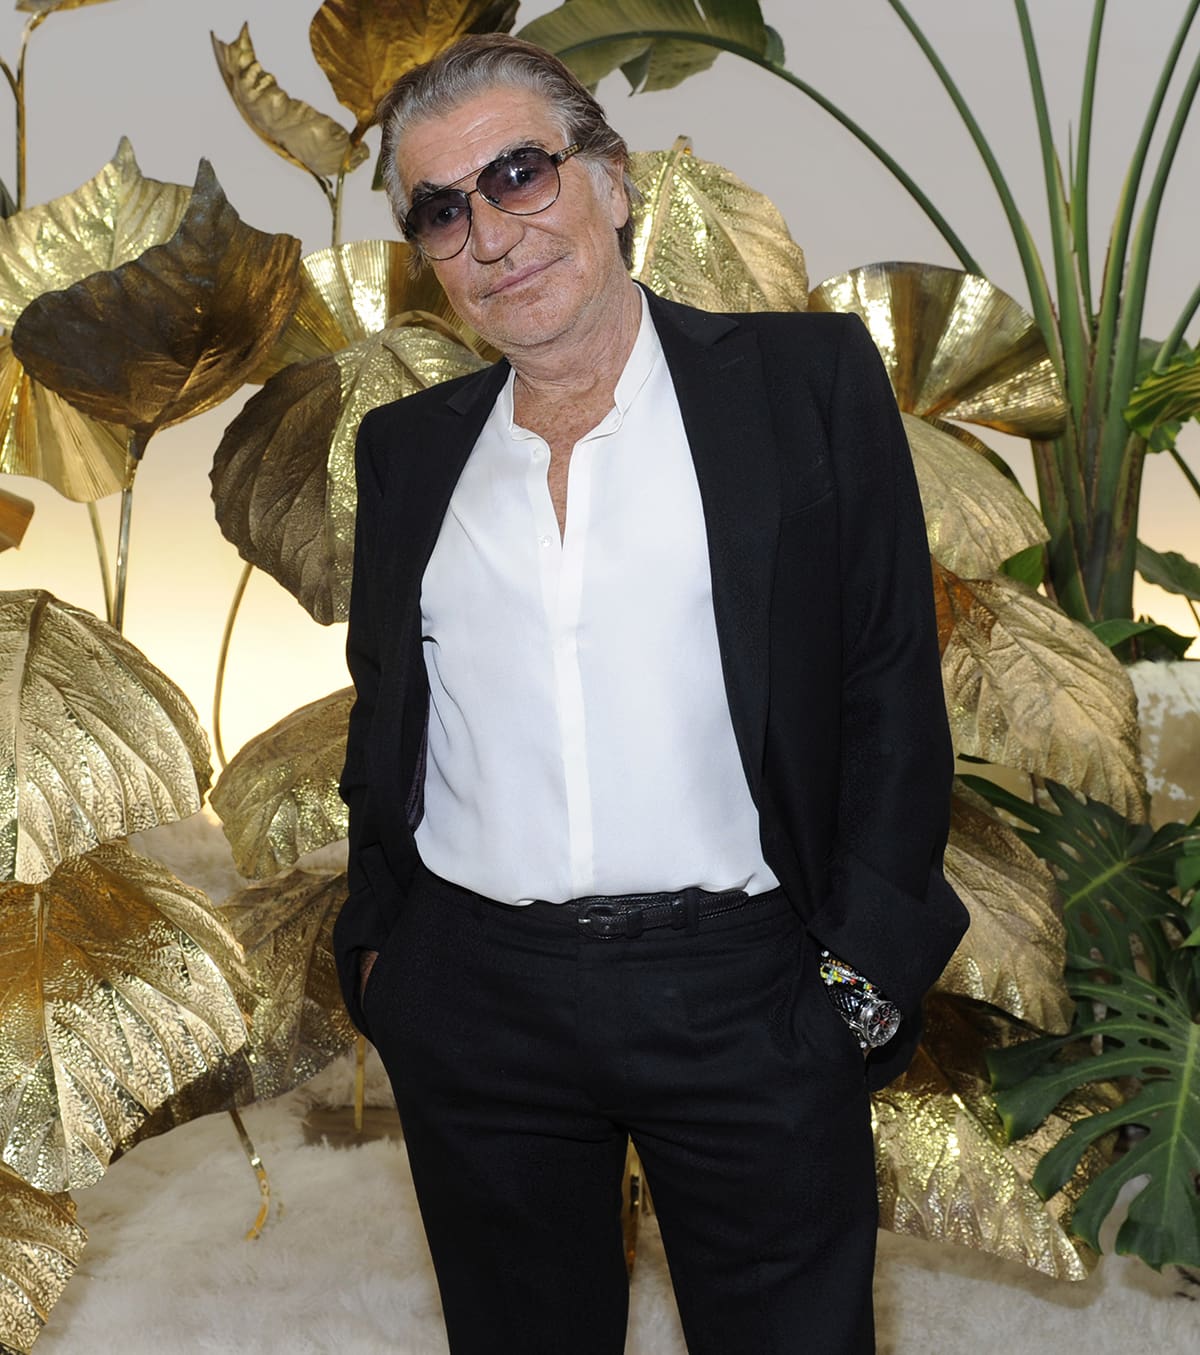 Following his return to the brand in 2014 as the menswear Creative Director, Roberto Cavalli approached Investcorp as a potential buyer of his stake in his fashion brand